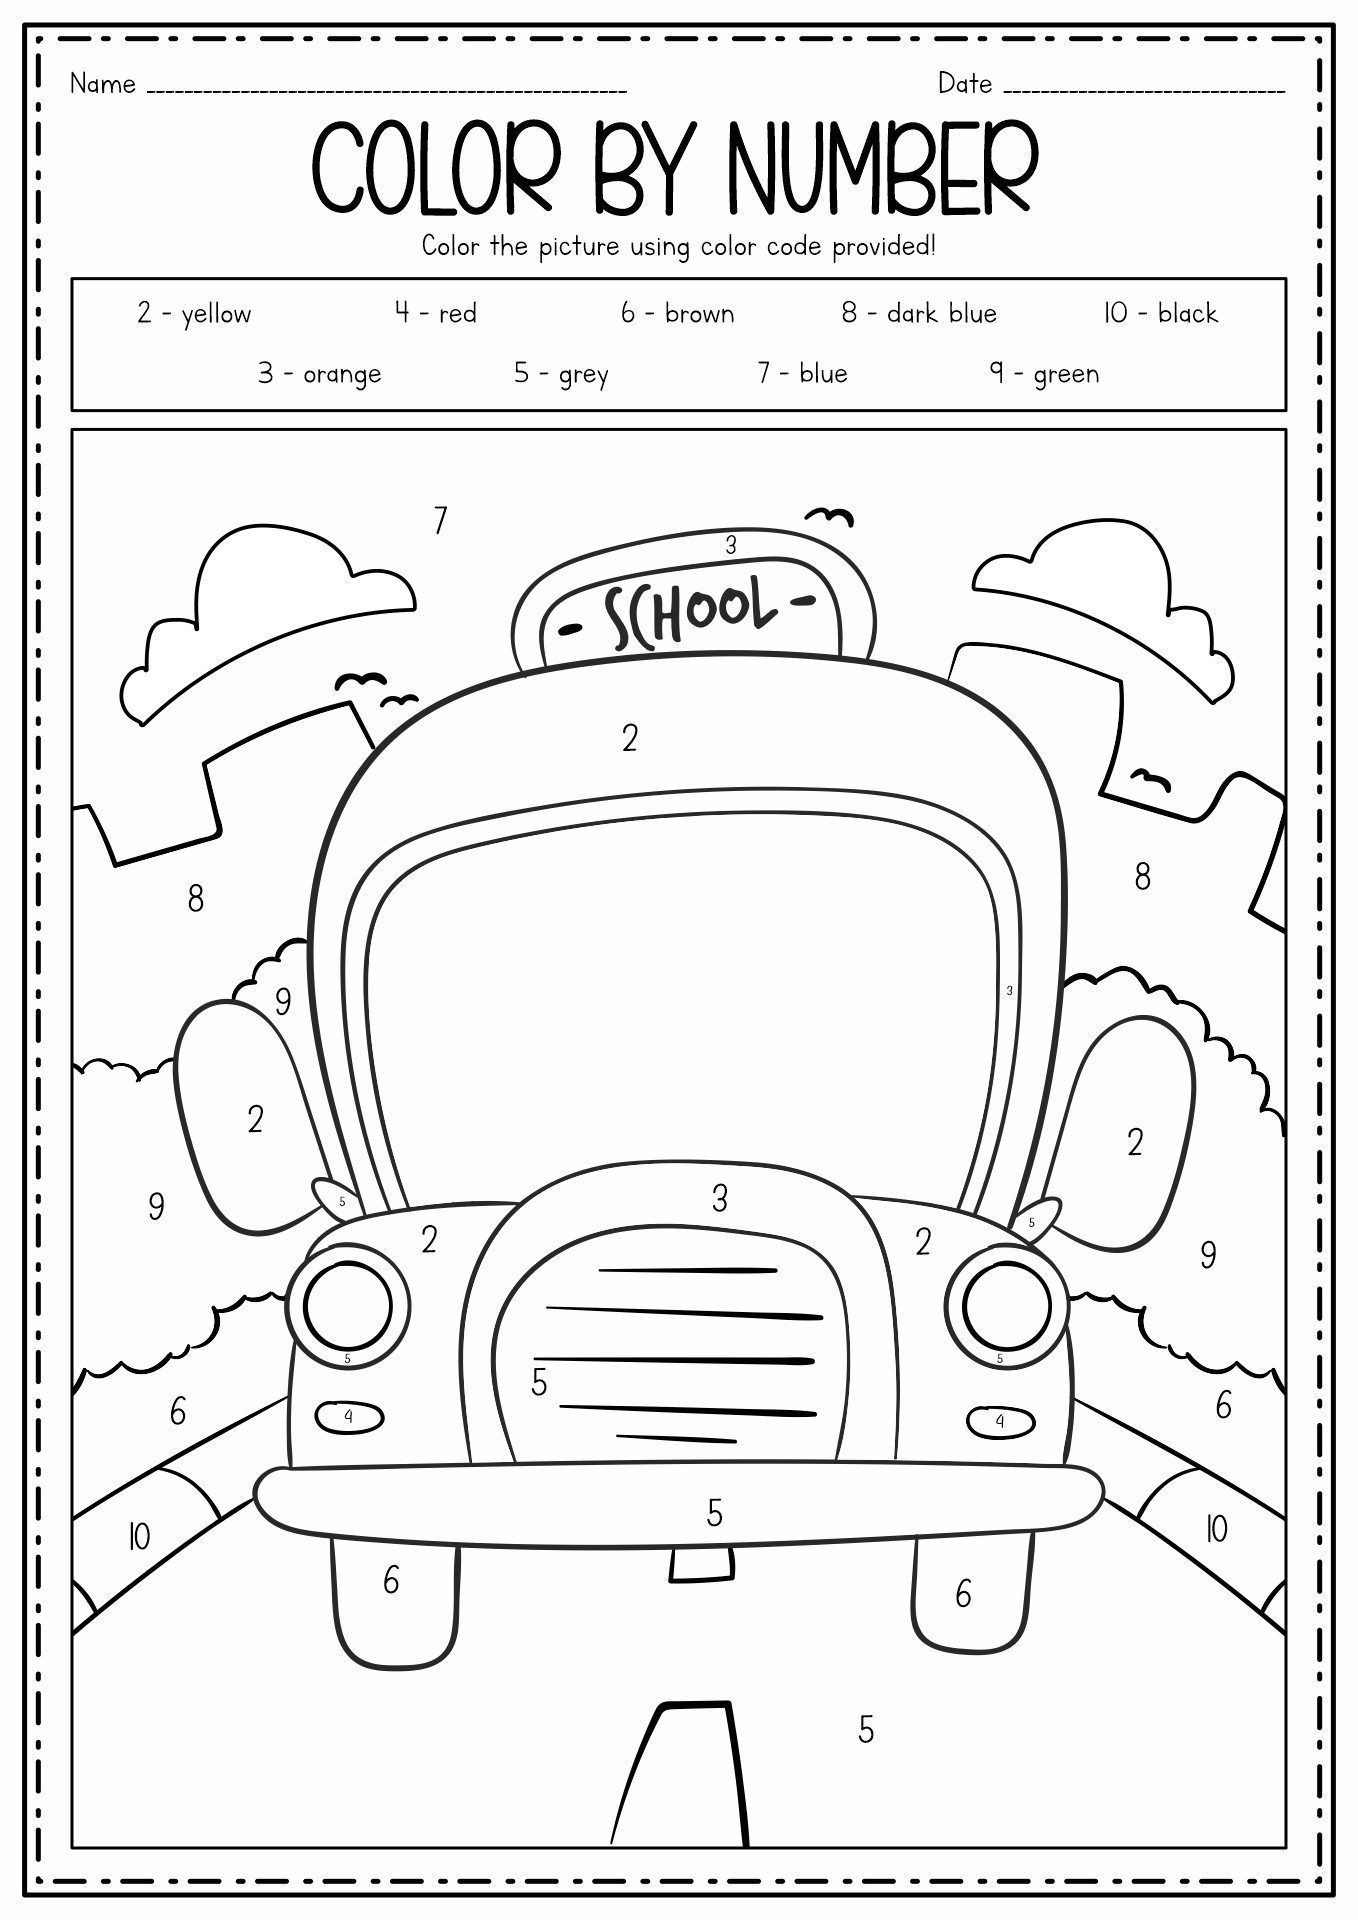 Back to School Fun Worksheets Image